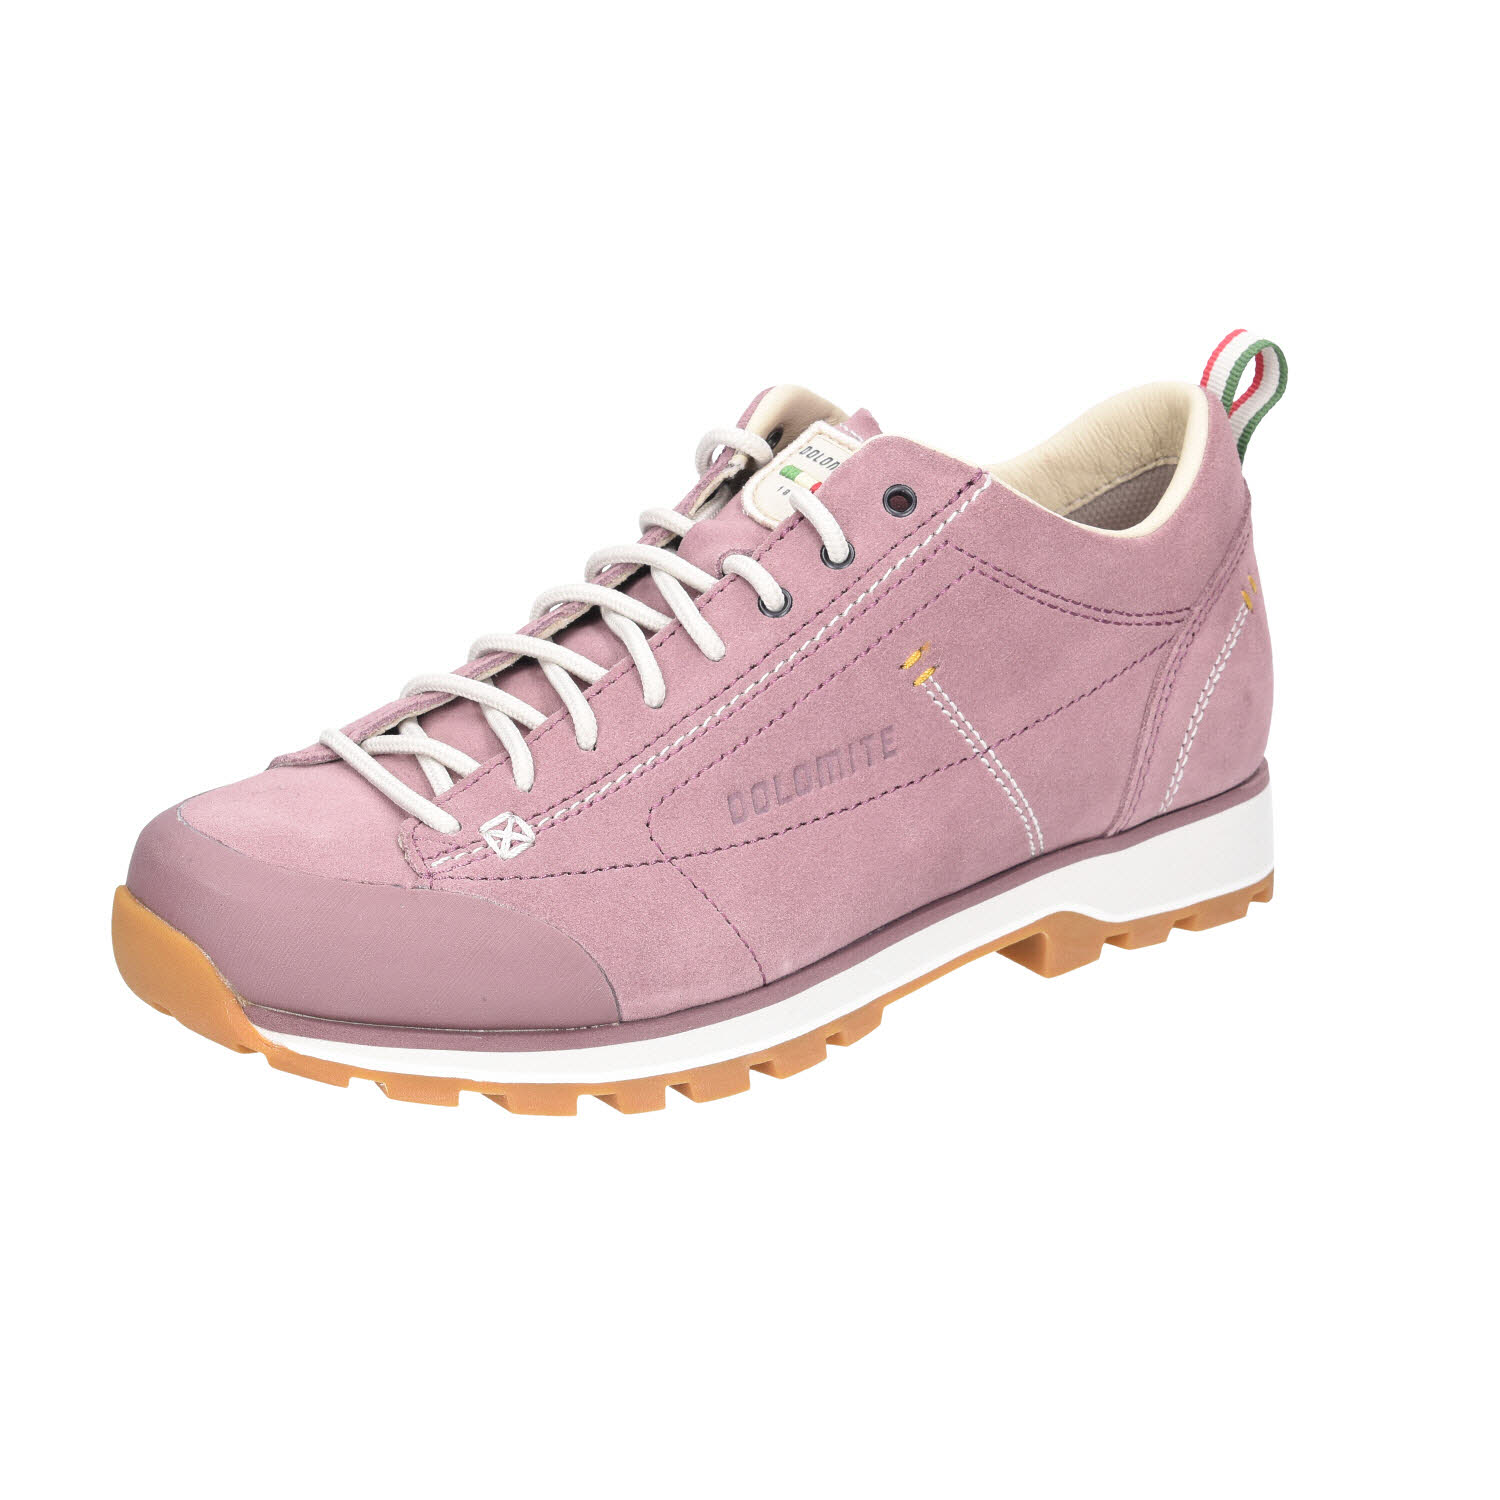 Dolomite 54 Low Dusty Rose pink